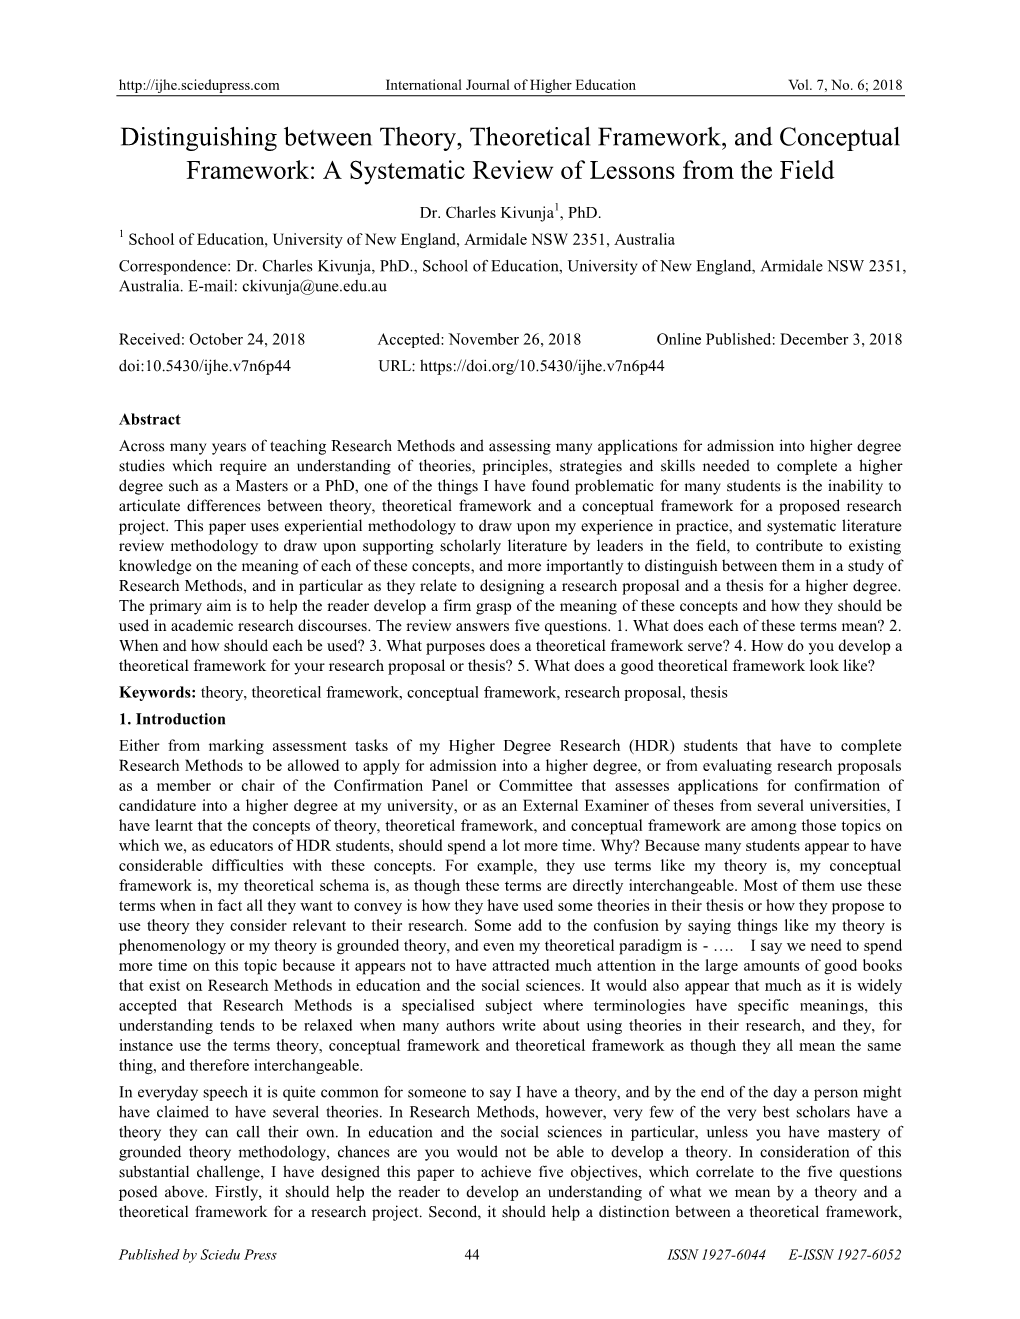 Distinguishing Between Theory, Theoretical Framework, and Conceptual Framework: a Systematic Review of Lessons from the Field